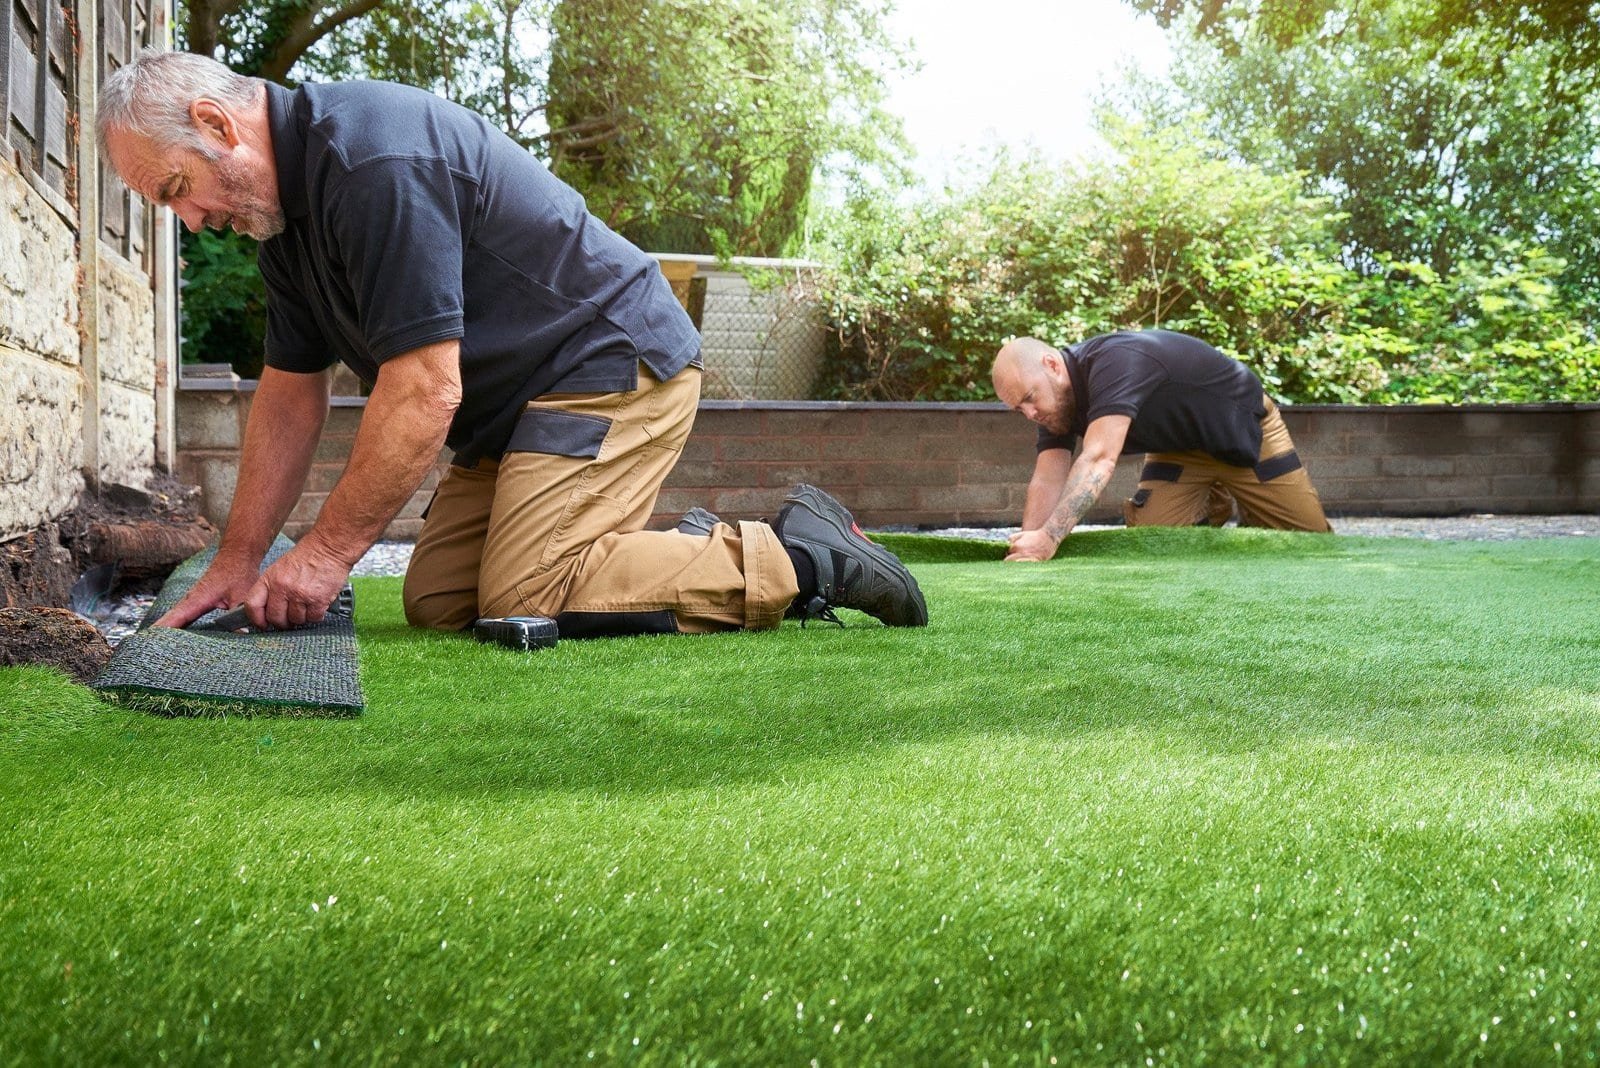 Two men kneeling on a lawn in Houston, TX, are installing artificial turf for a putting green in a garden. Focused on aligning and securing the turf near a house, both are dressed in black shirts and khaki pants. The garden is beautifully surrounded by greenery and trees in the background.